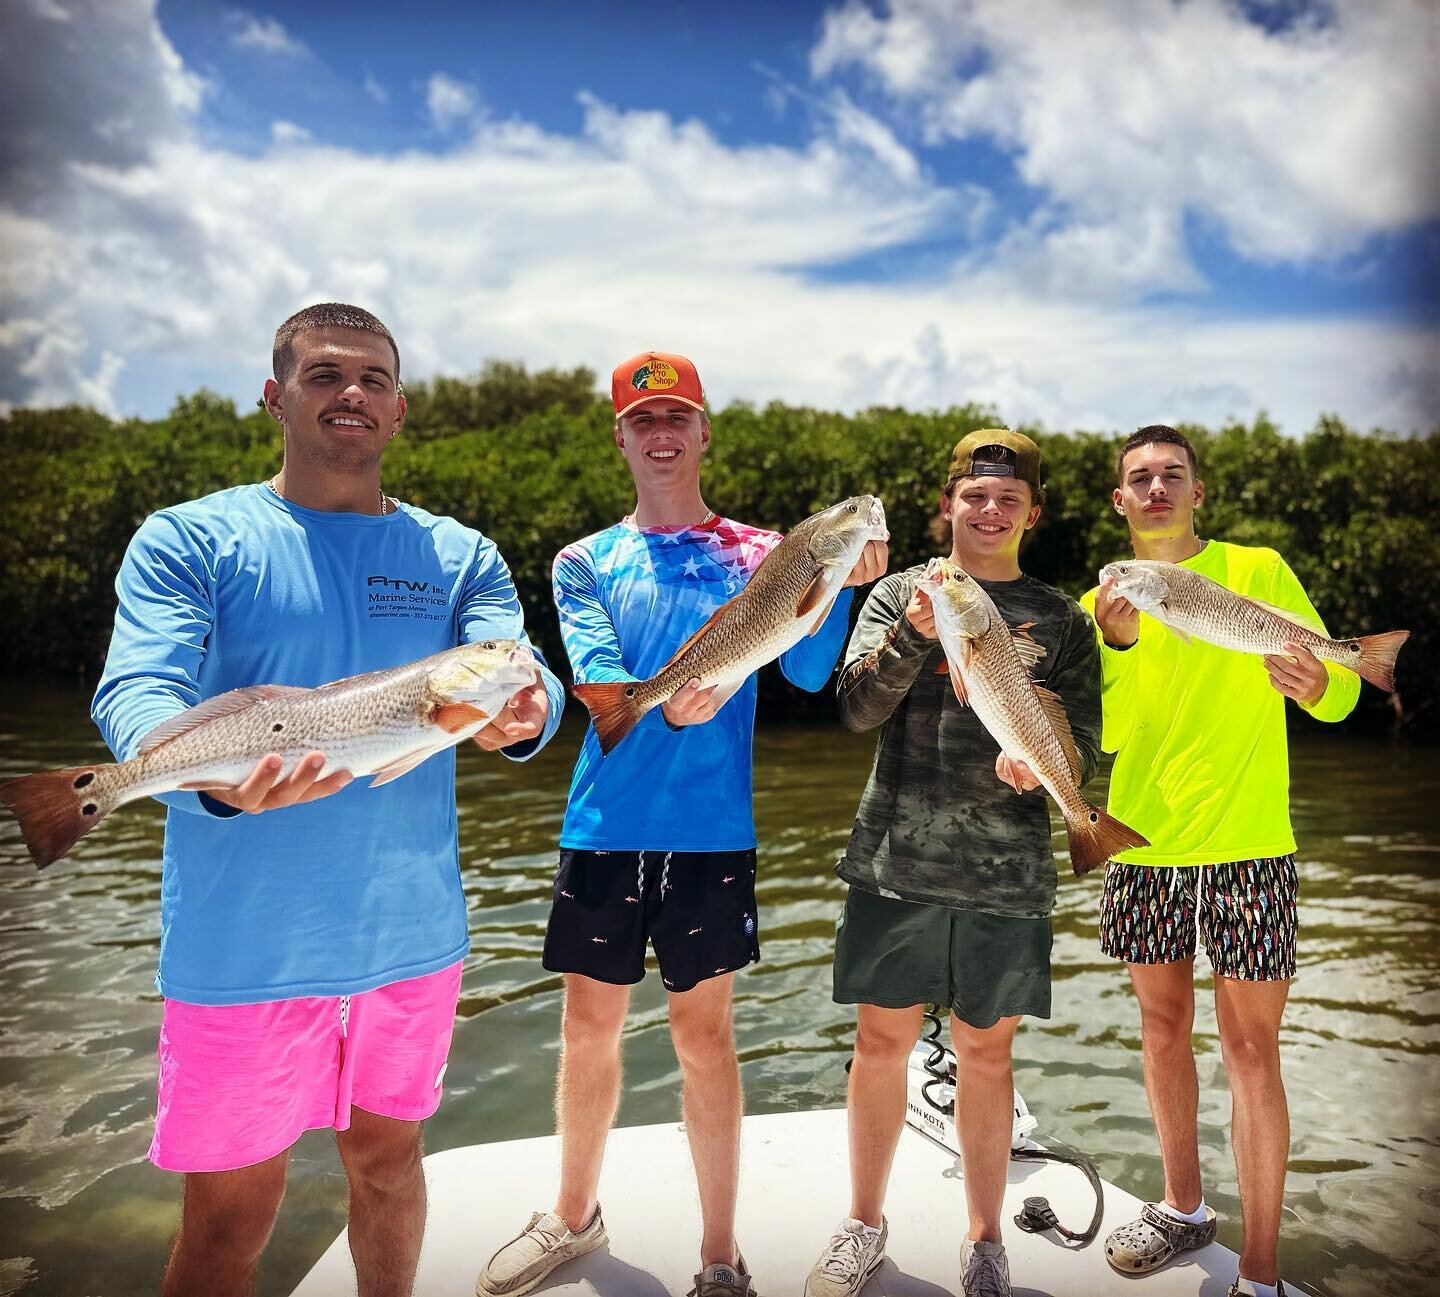 Great day catching reds with Tyler and his #crystalriver #captjameskerr
#crystalriverflatsfishing #fishing #naturecoast #seatrout #snook  #visitflorida #sodiumfishinggear #crystalriverfishing #inshorefishing #redfish 

www.crystalriverflatsfishing.co